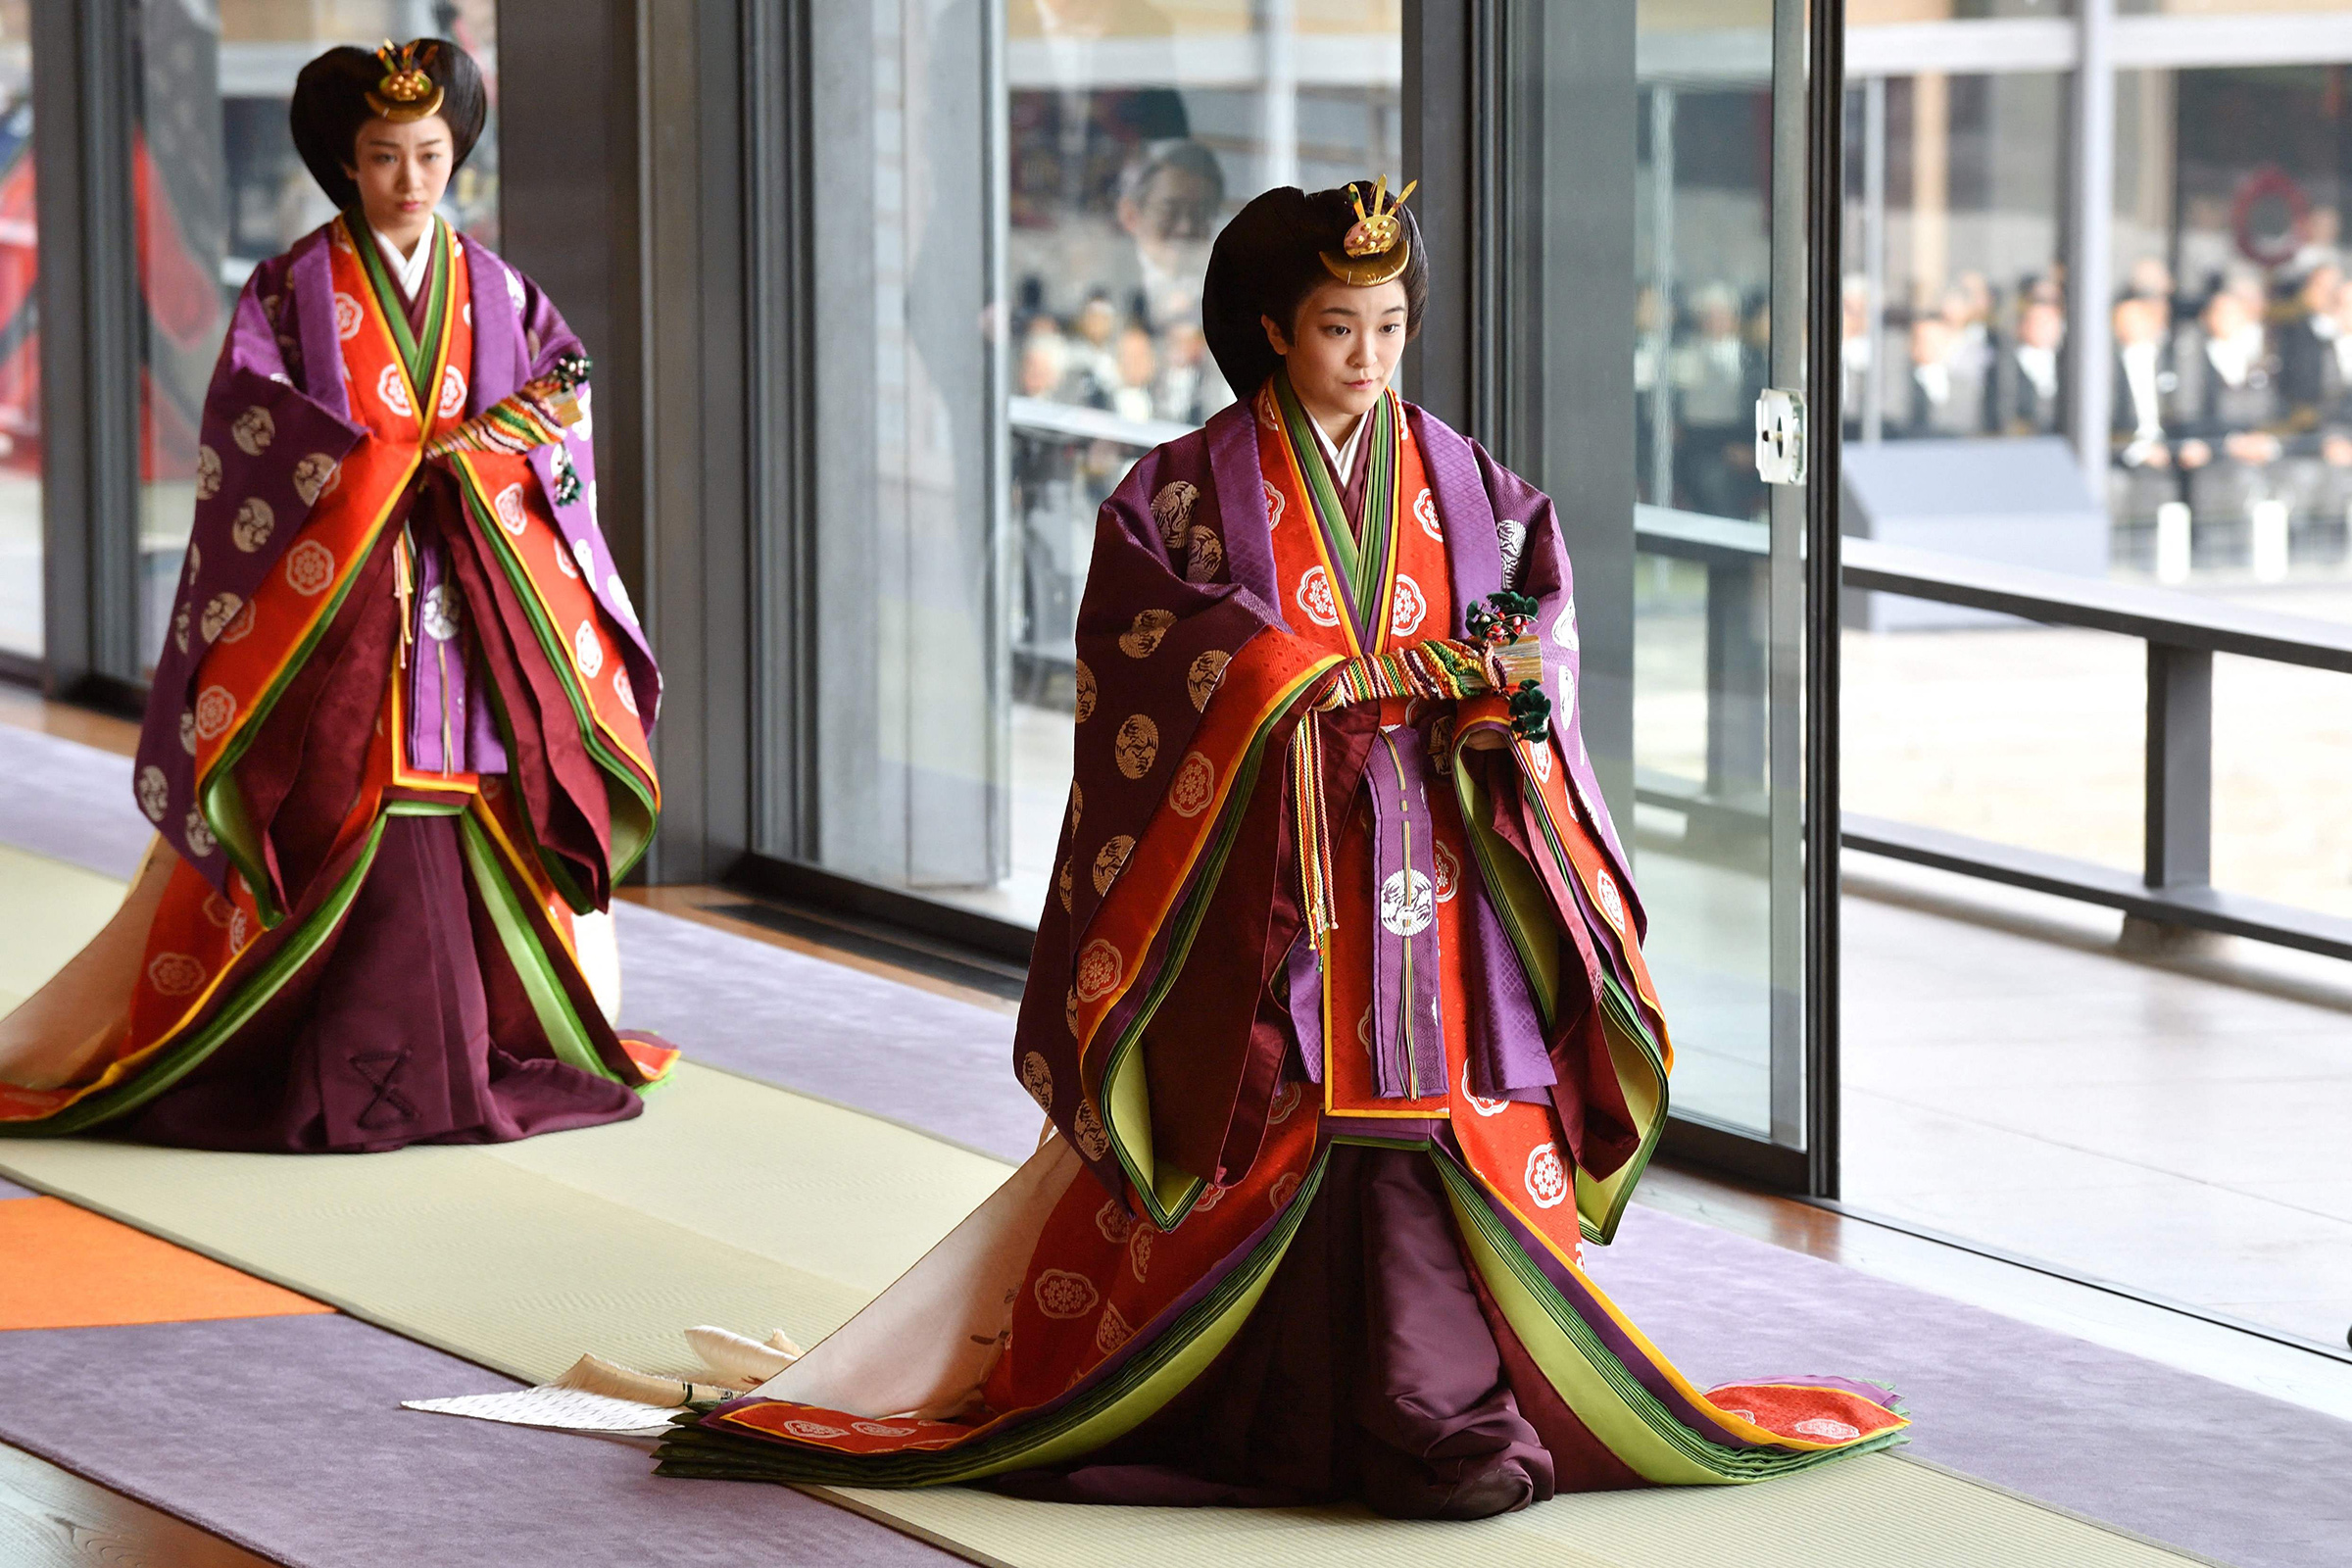 Princess Mako, right, attends the enthronement ceremony where Emperor Naruhito officially proclaimed his ascension to the Chrysanthemum Throne, at the Imperial Palace, Tokyo, in Oct. 2019. (Kazuhiro Nogi—Pool/AFP/Getty Images)